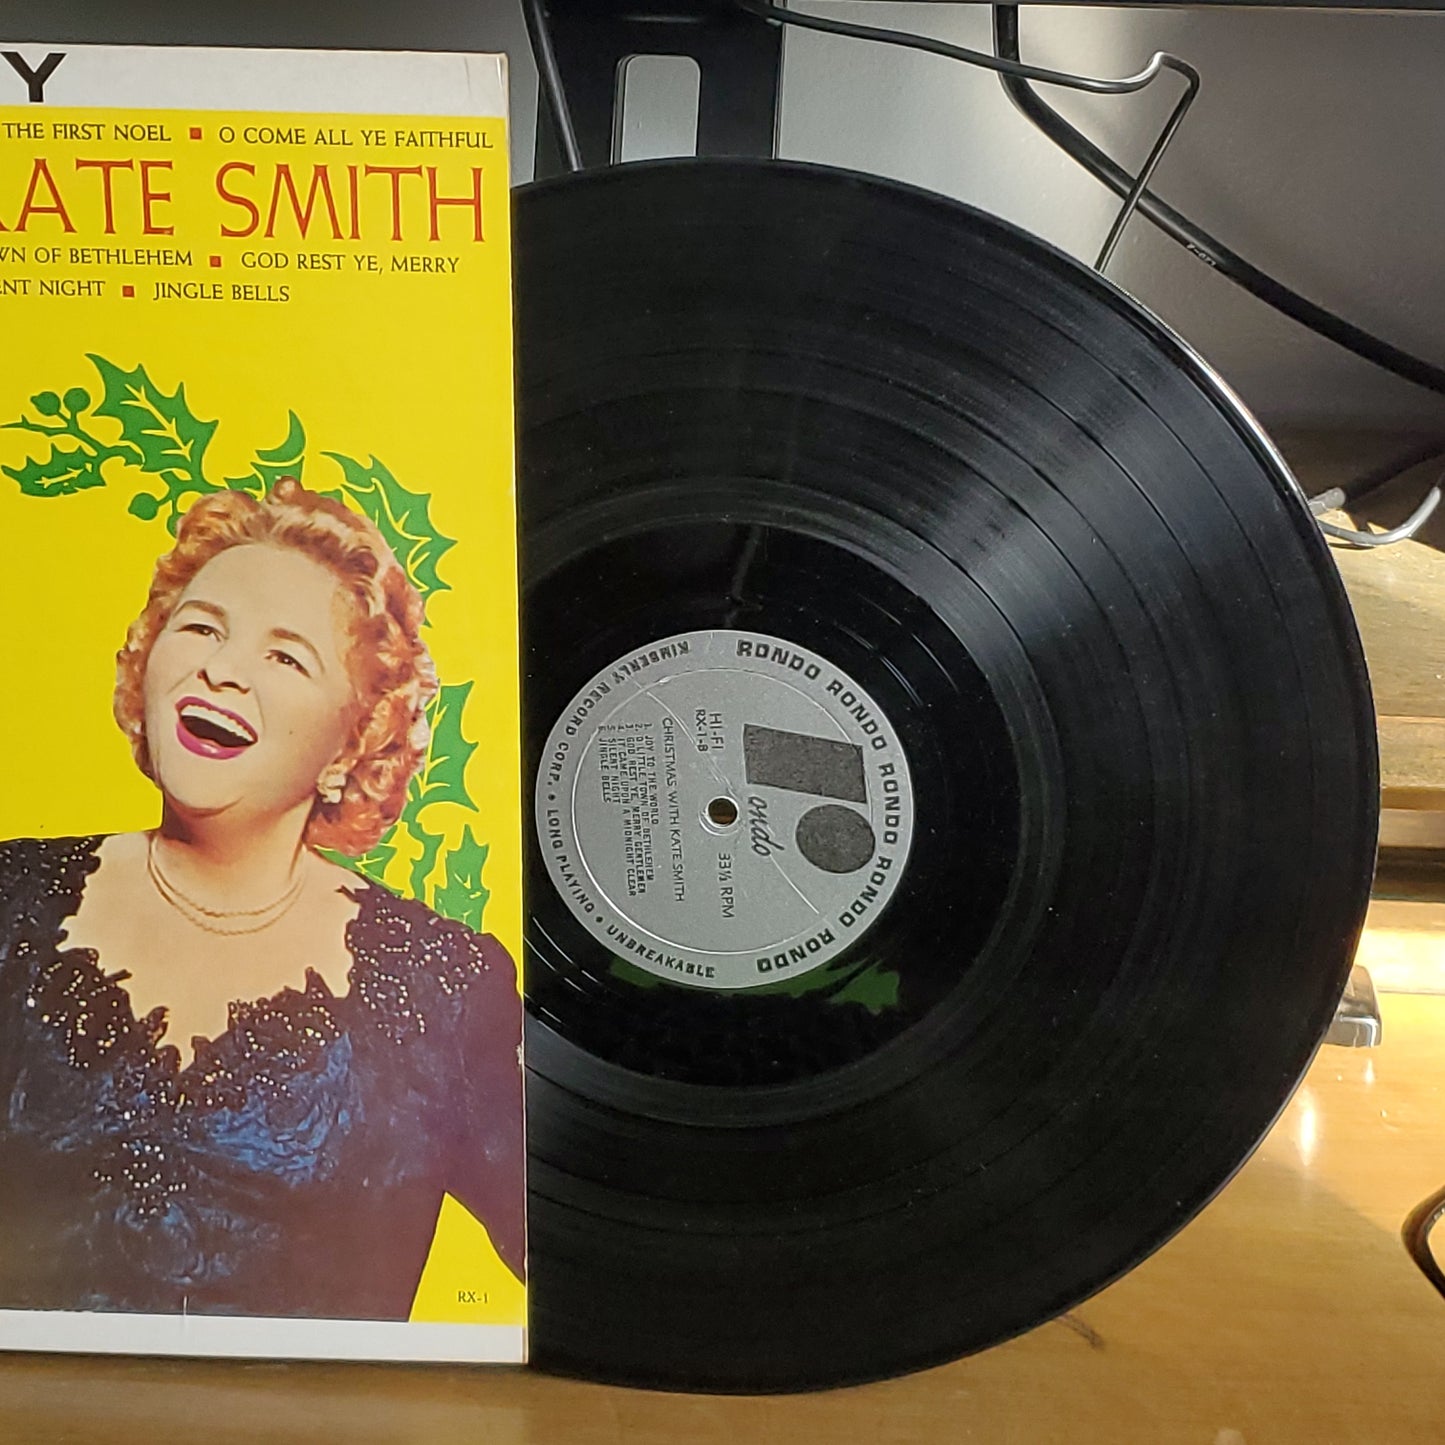 Christmas with Kate Smith By Kimberly Records